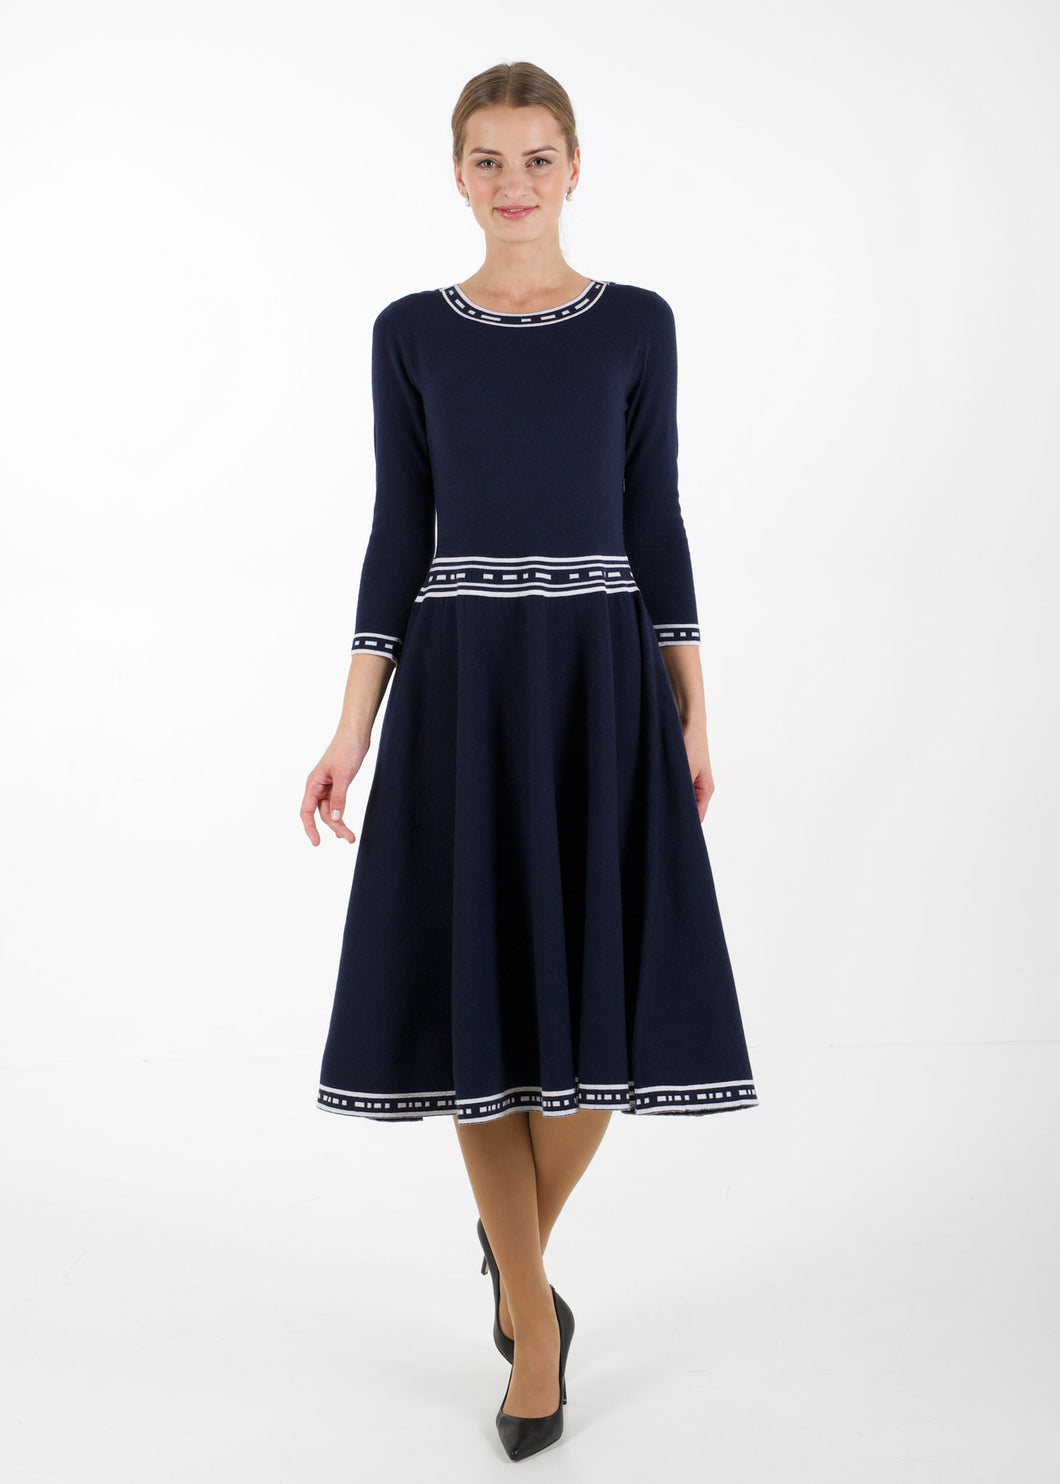 Fit and flare knit dress, navy